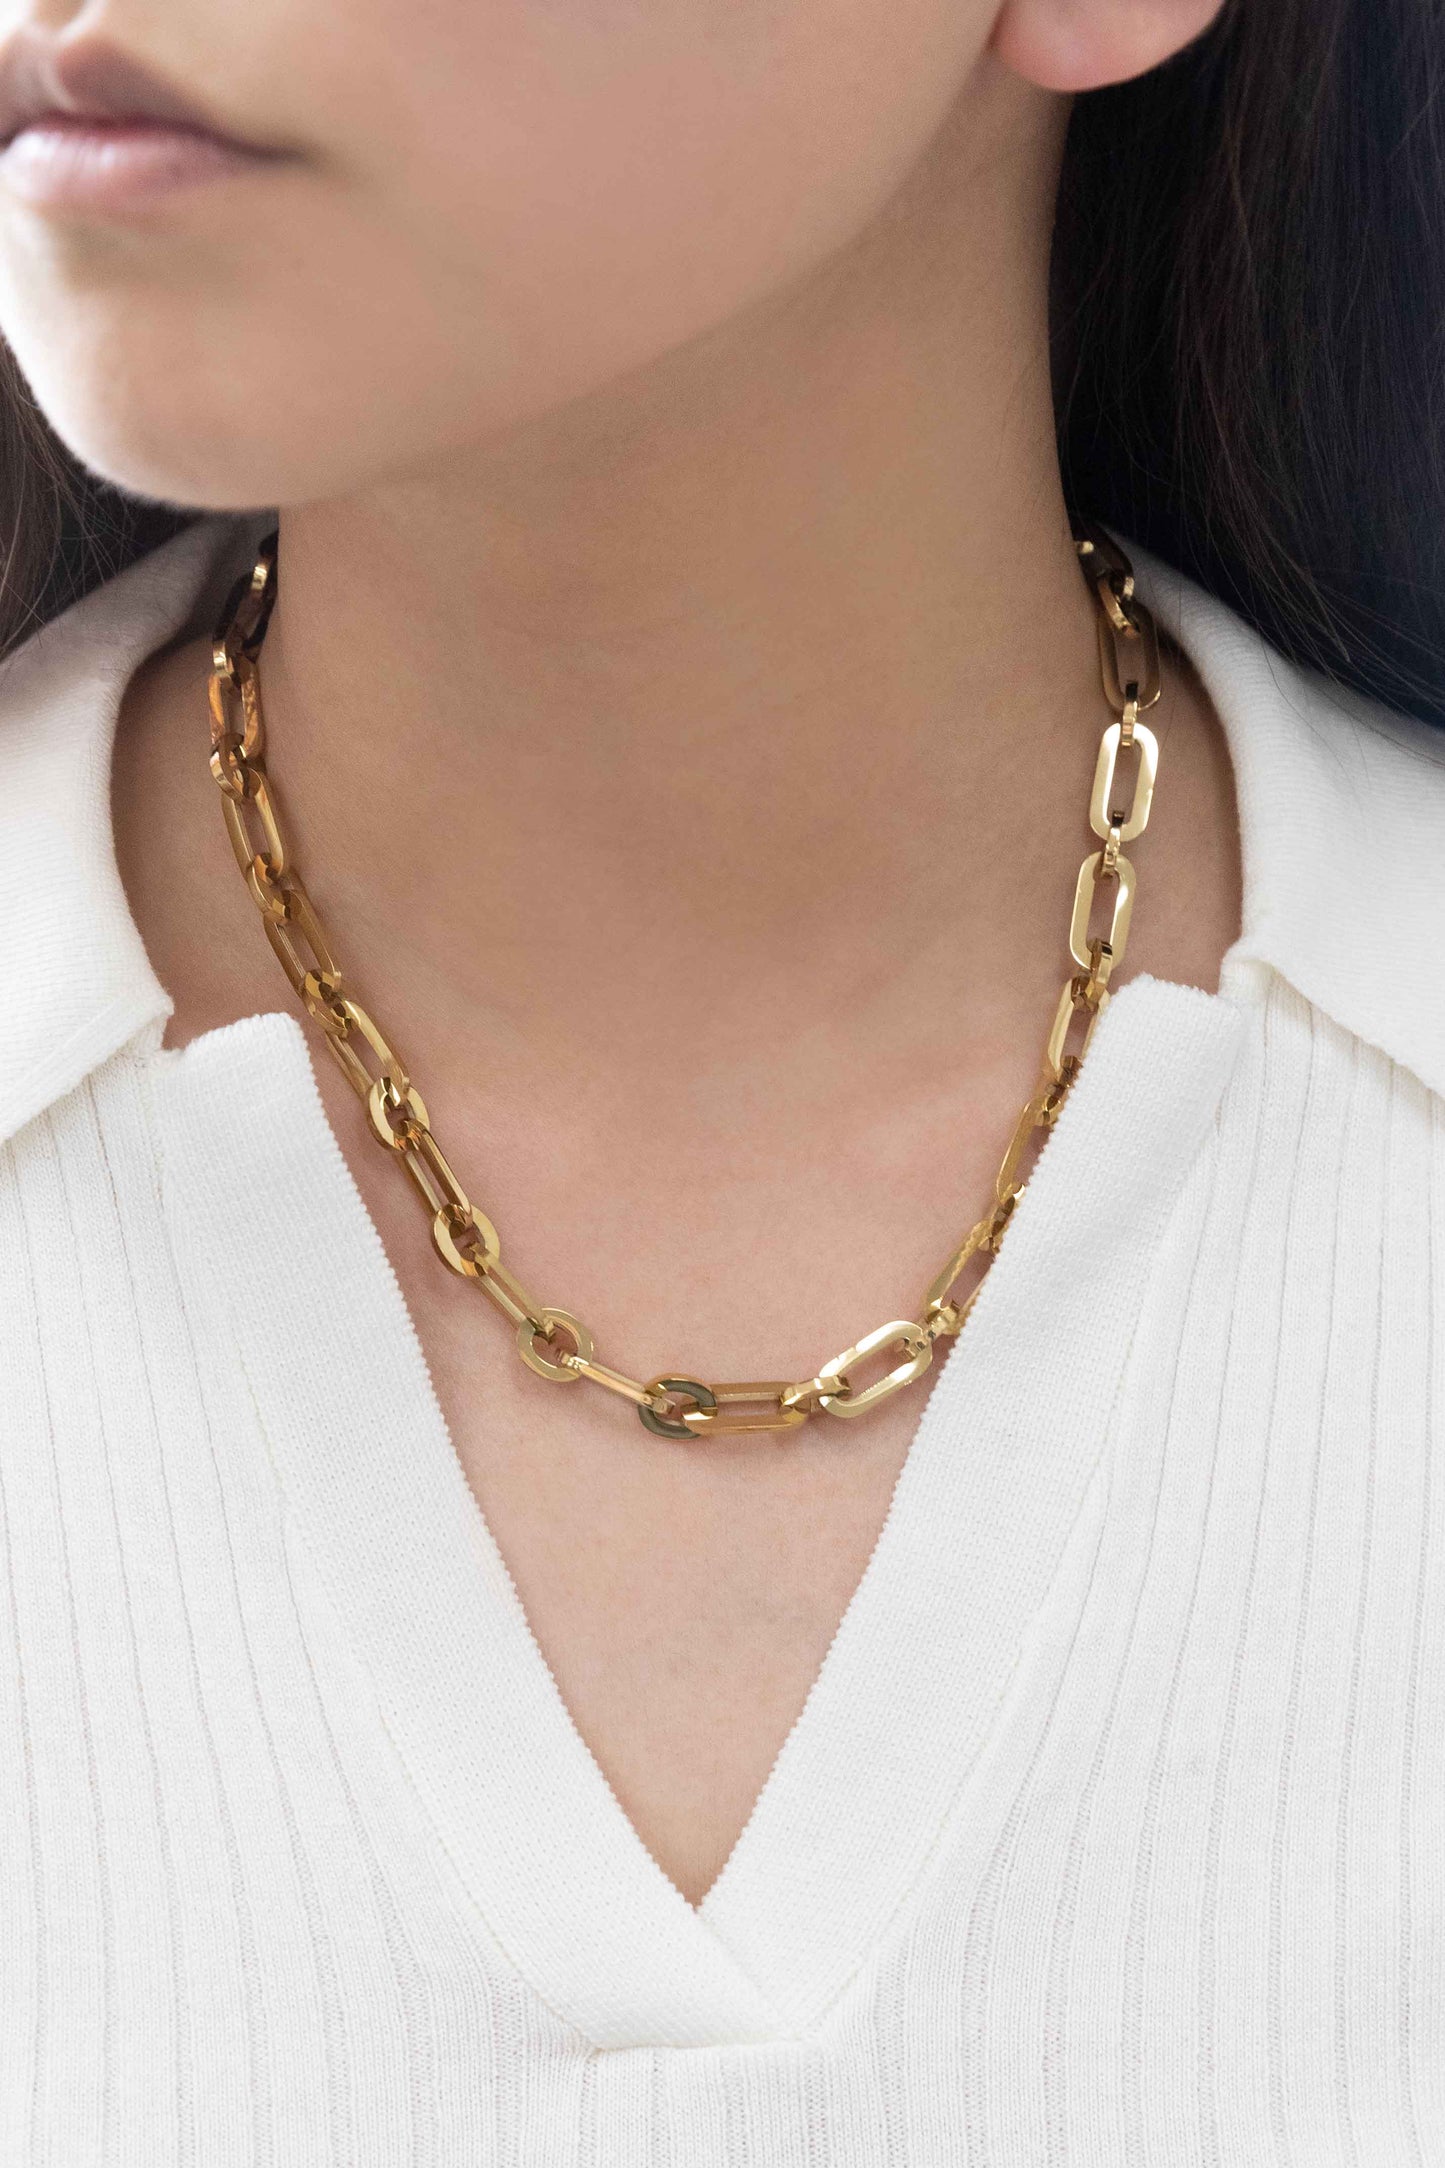 Overawe Large Chain Link Necklace (14K)